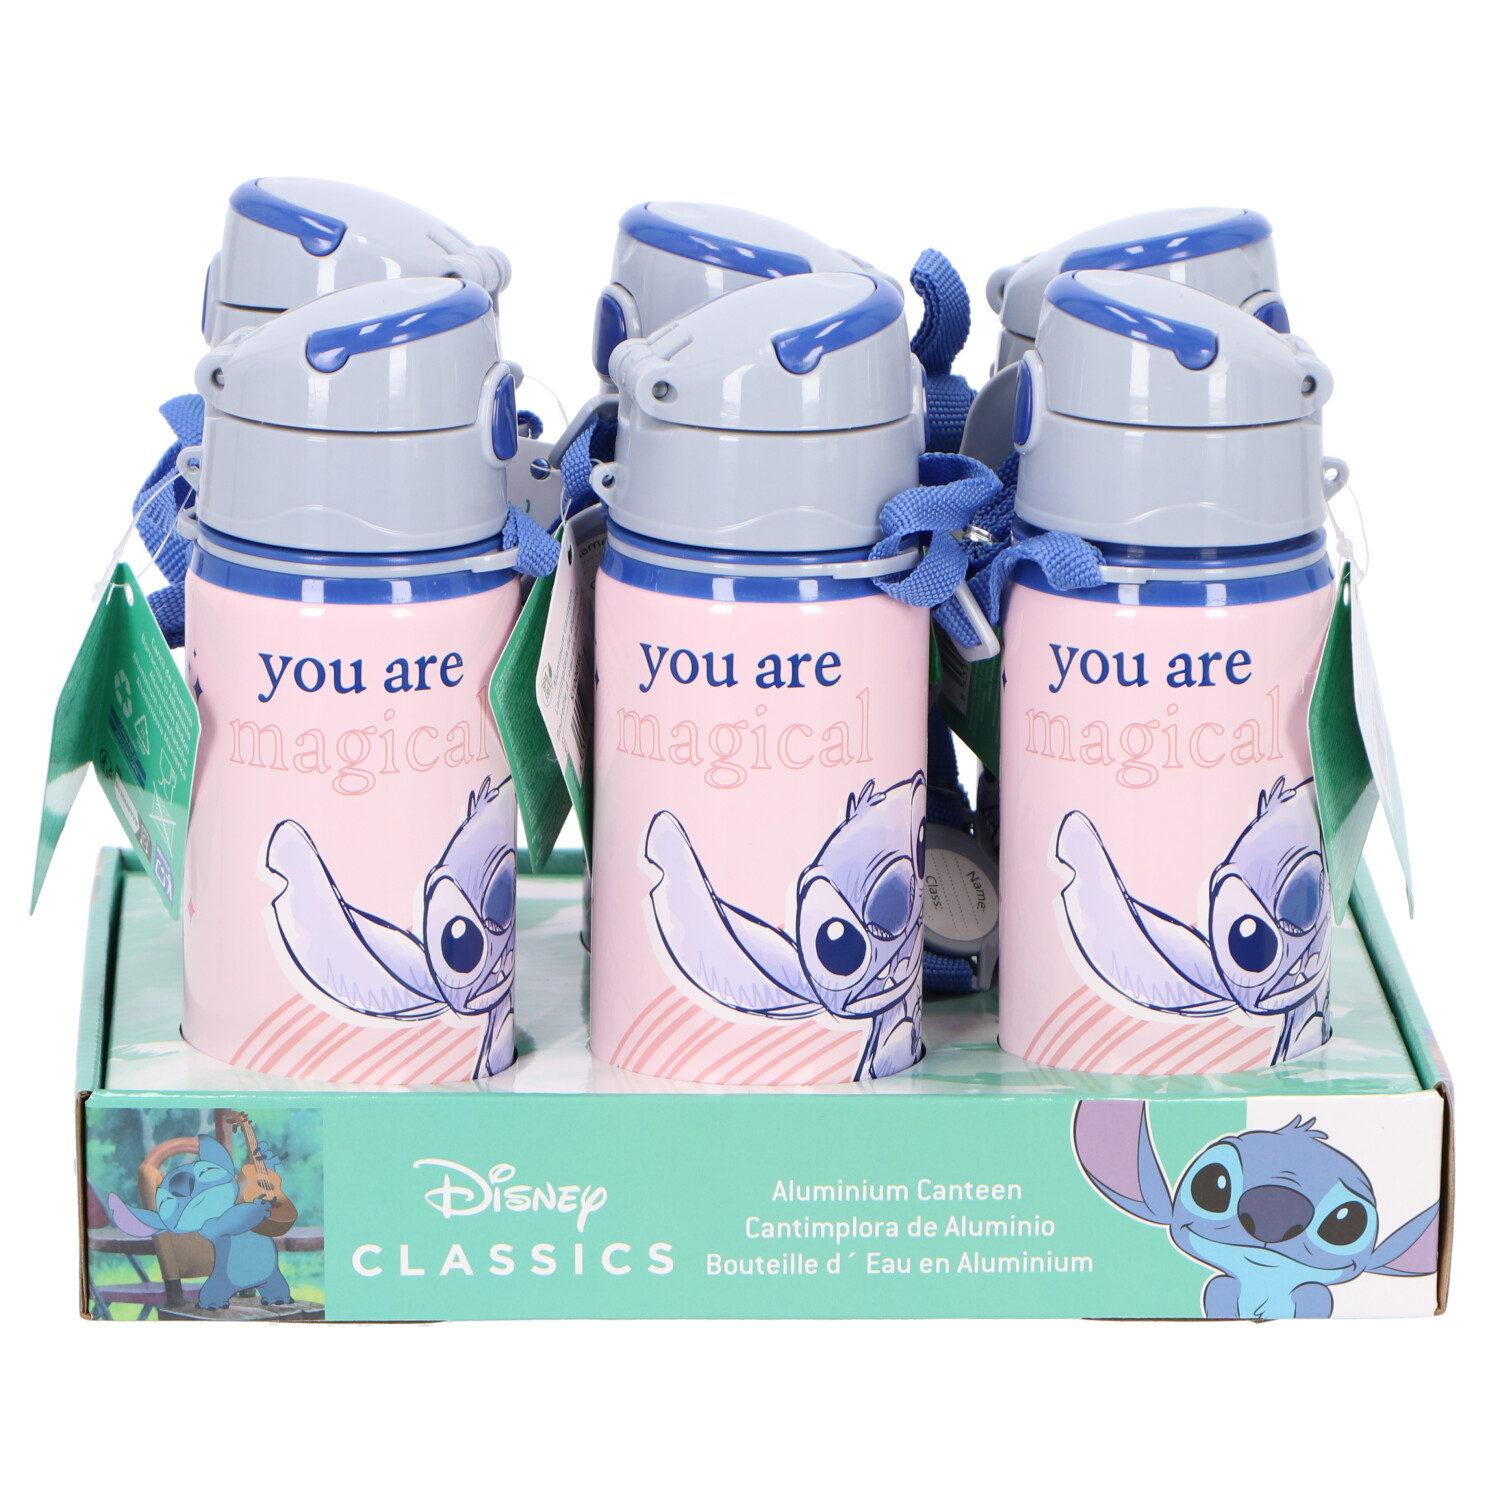 Lilo & Stitch Drinking bottle - You are Magical - Sweet Dreams